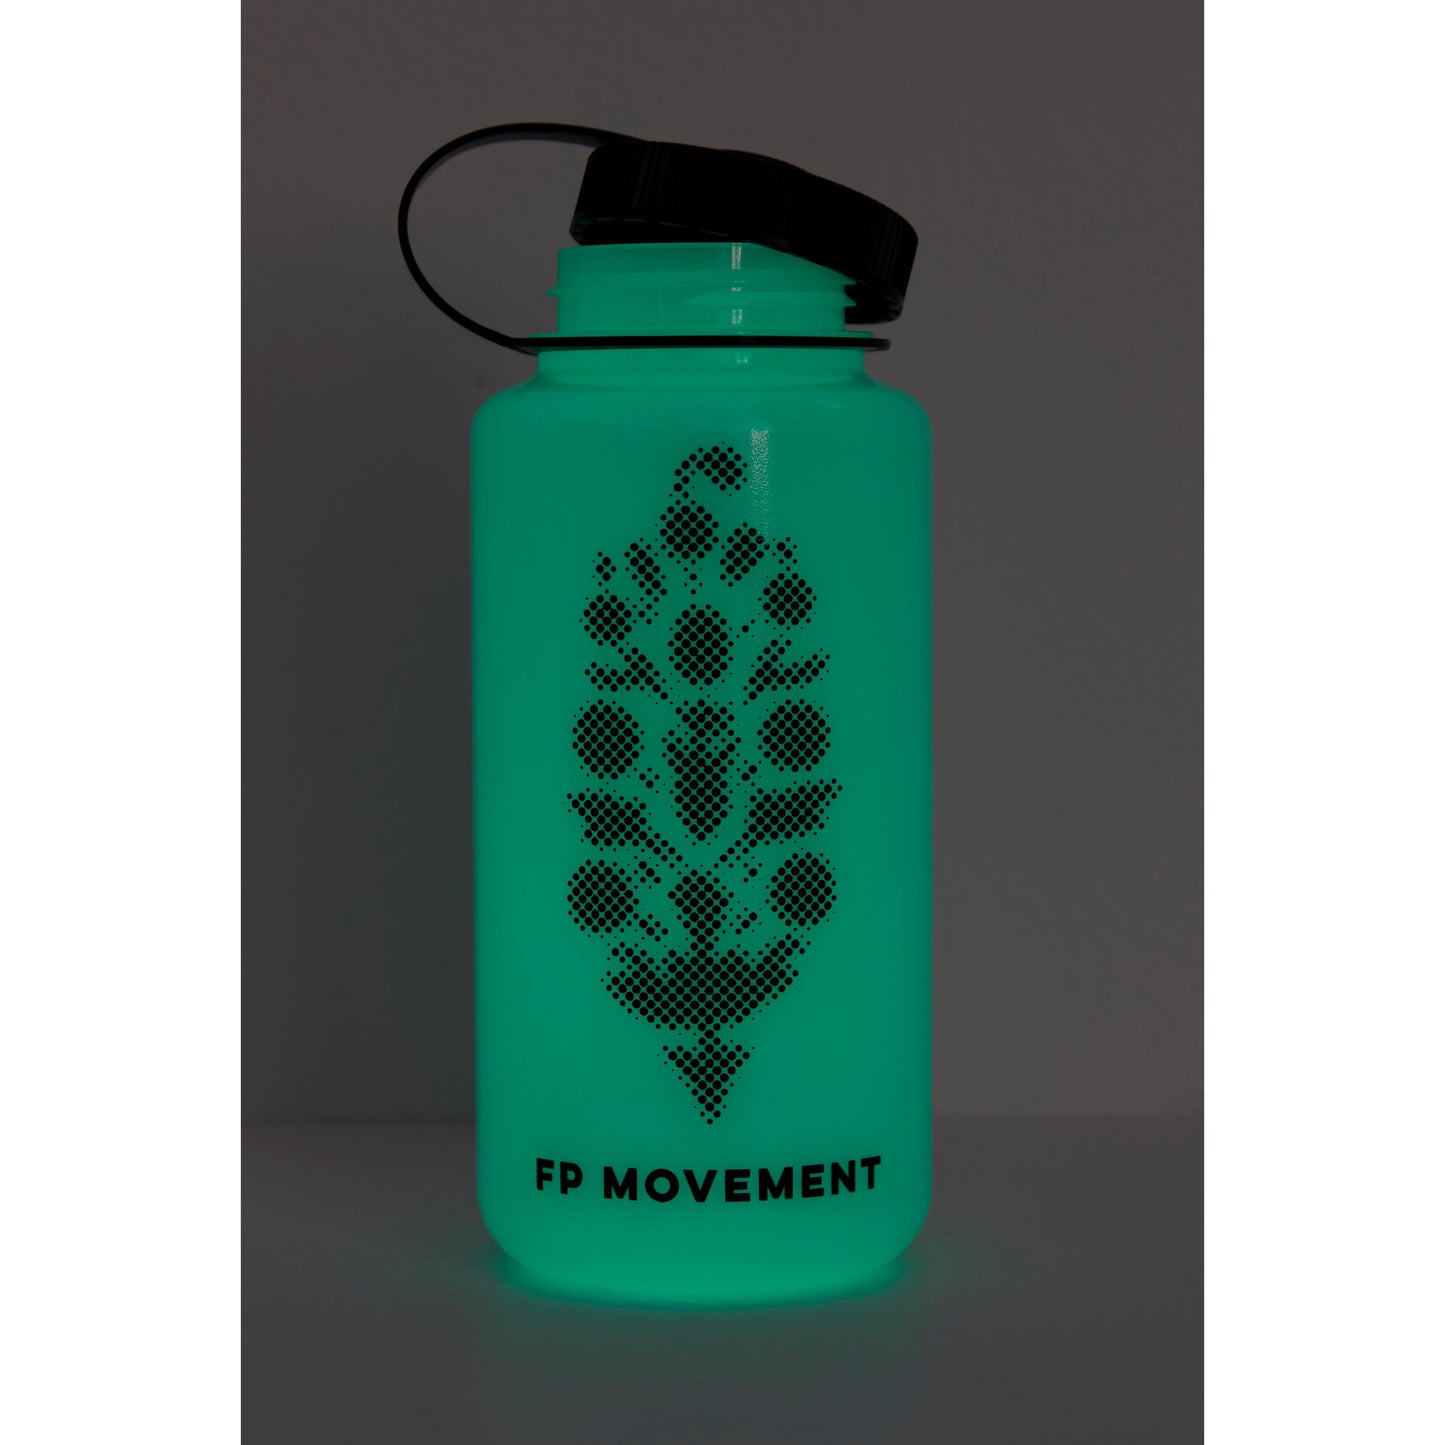 A teal GITD water bottle with a black lid and a dotted pineapple design labeled "Free People Movement" against a gray background.